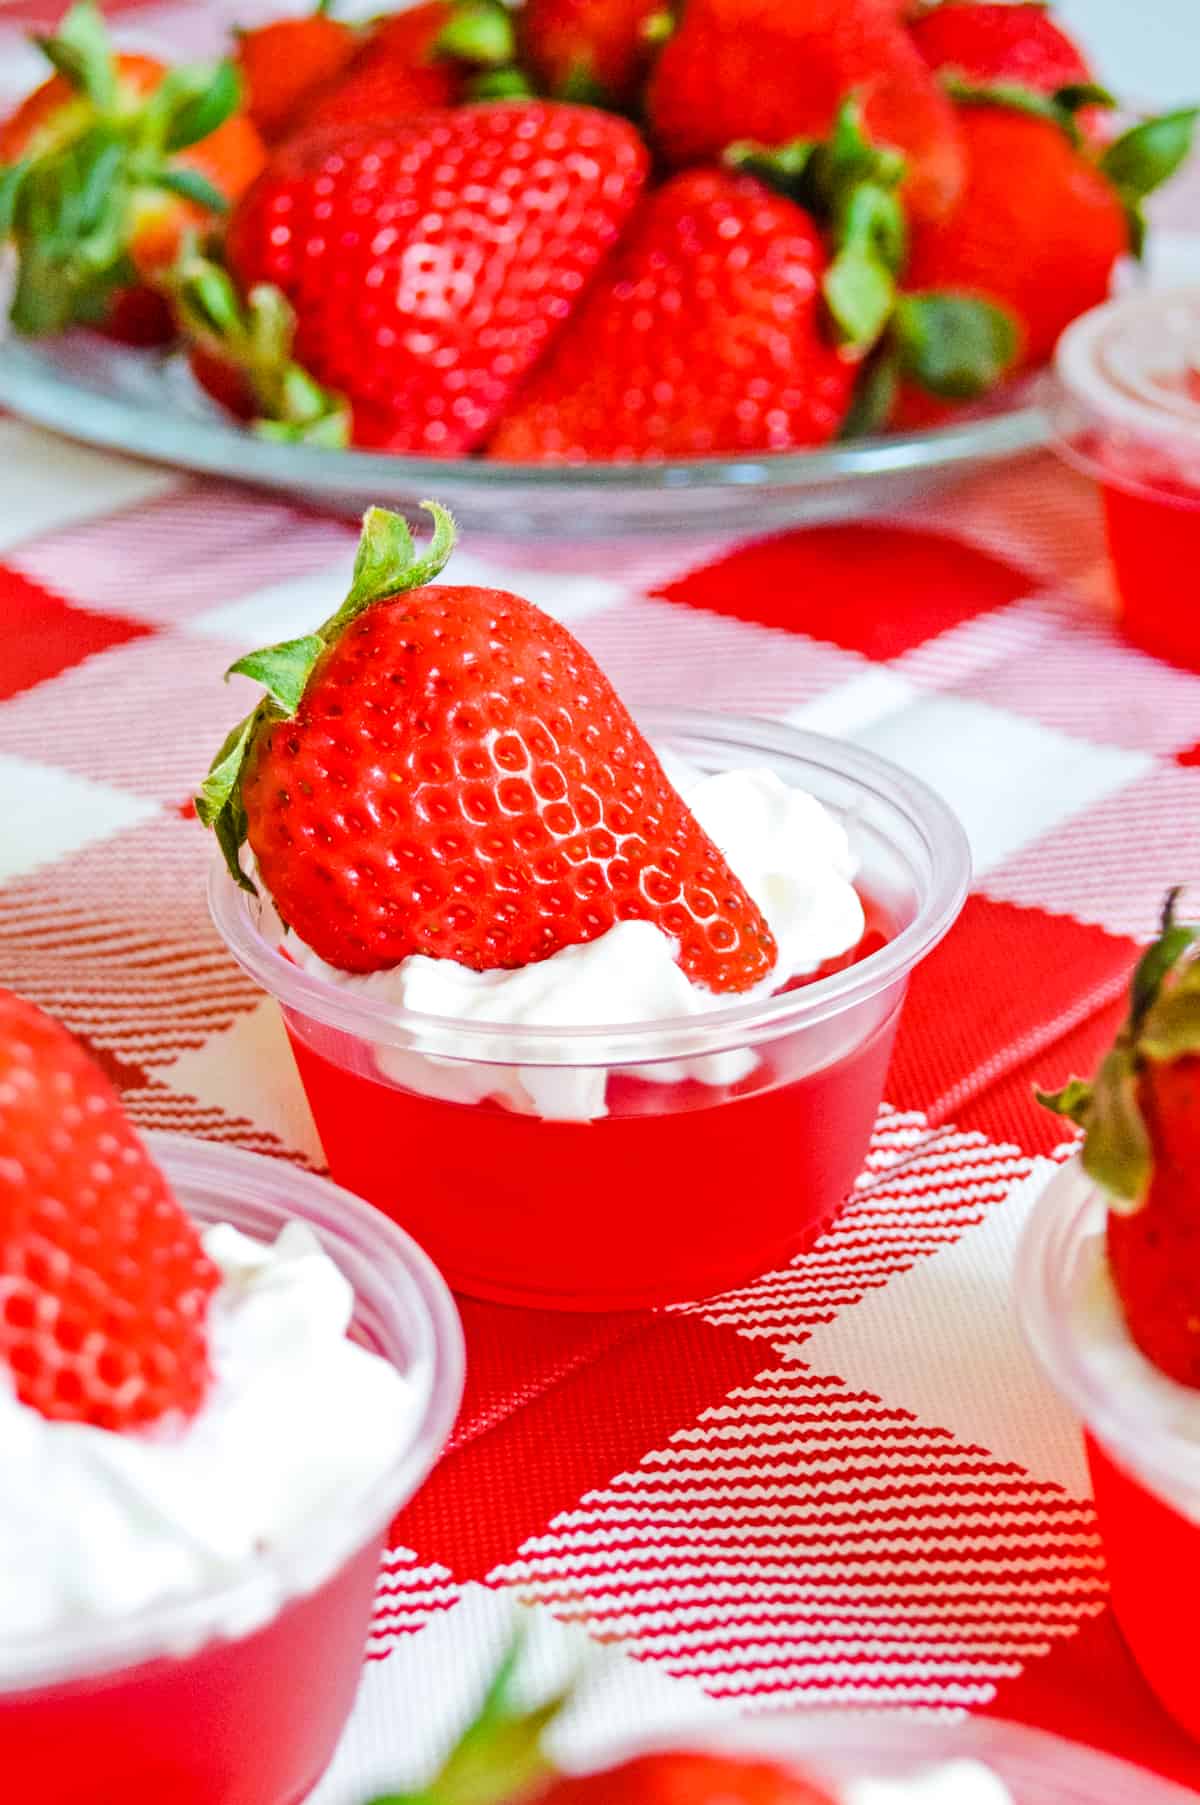 strawberry jello shots on a red checked tablecloth with a plate of fresh strawberries in the background